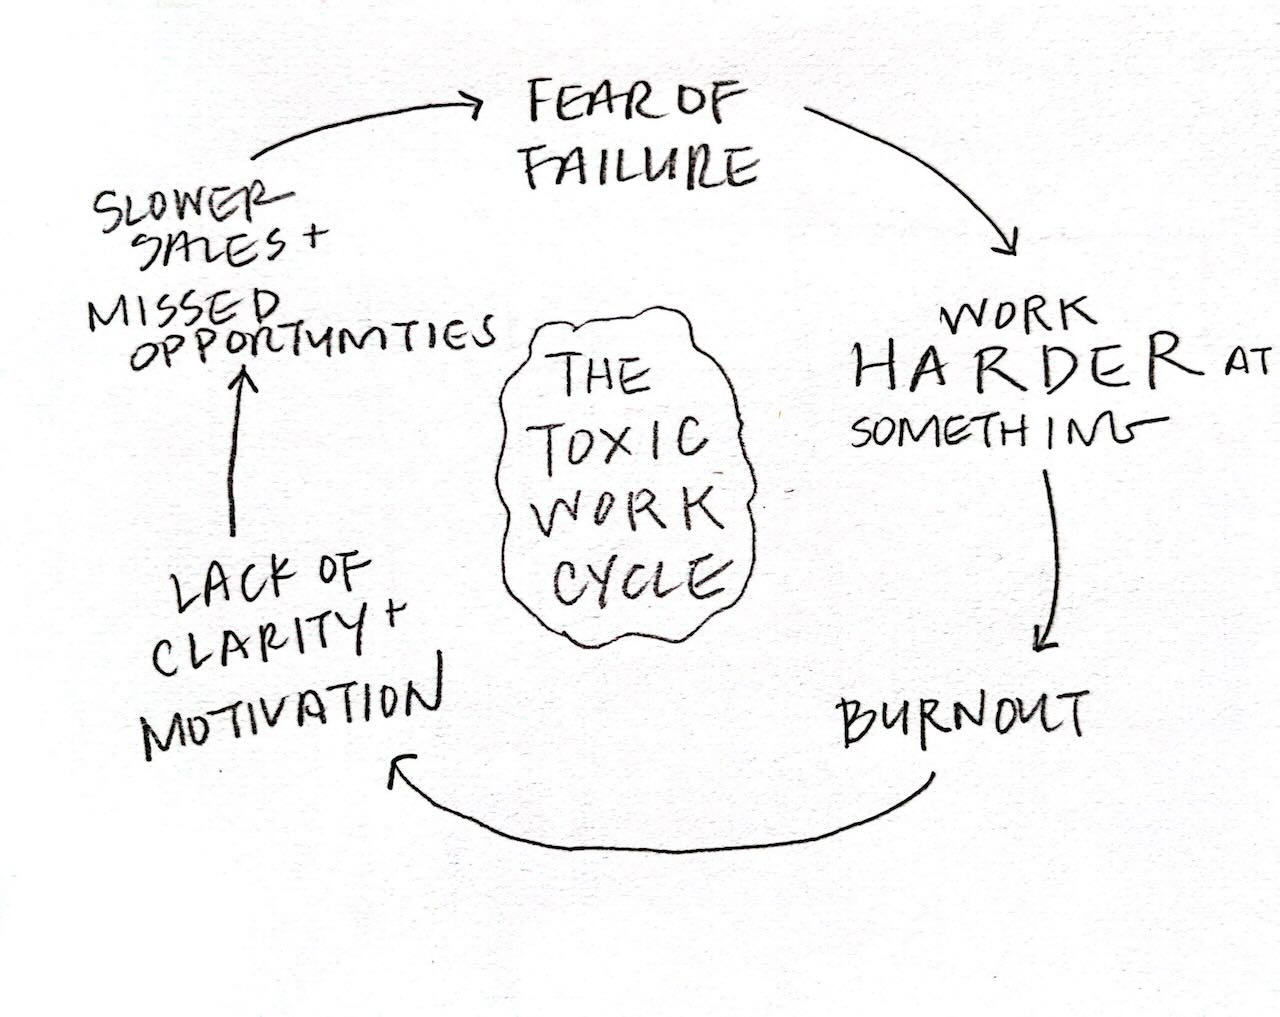 A hand-drawn diagram titled "The Toxic Work Cycle." It depicts a cyclical process with arrows connecting the following stages: "Fear of Failure," "Work Harder at Something," "Burnout," "Lack of Clarity + Motivation," "Slower Sales + Missed Opportunities," and back to "Fear of Failure."